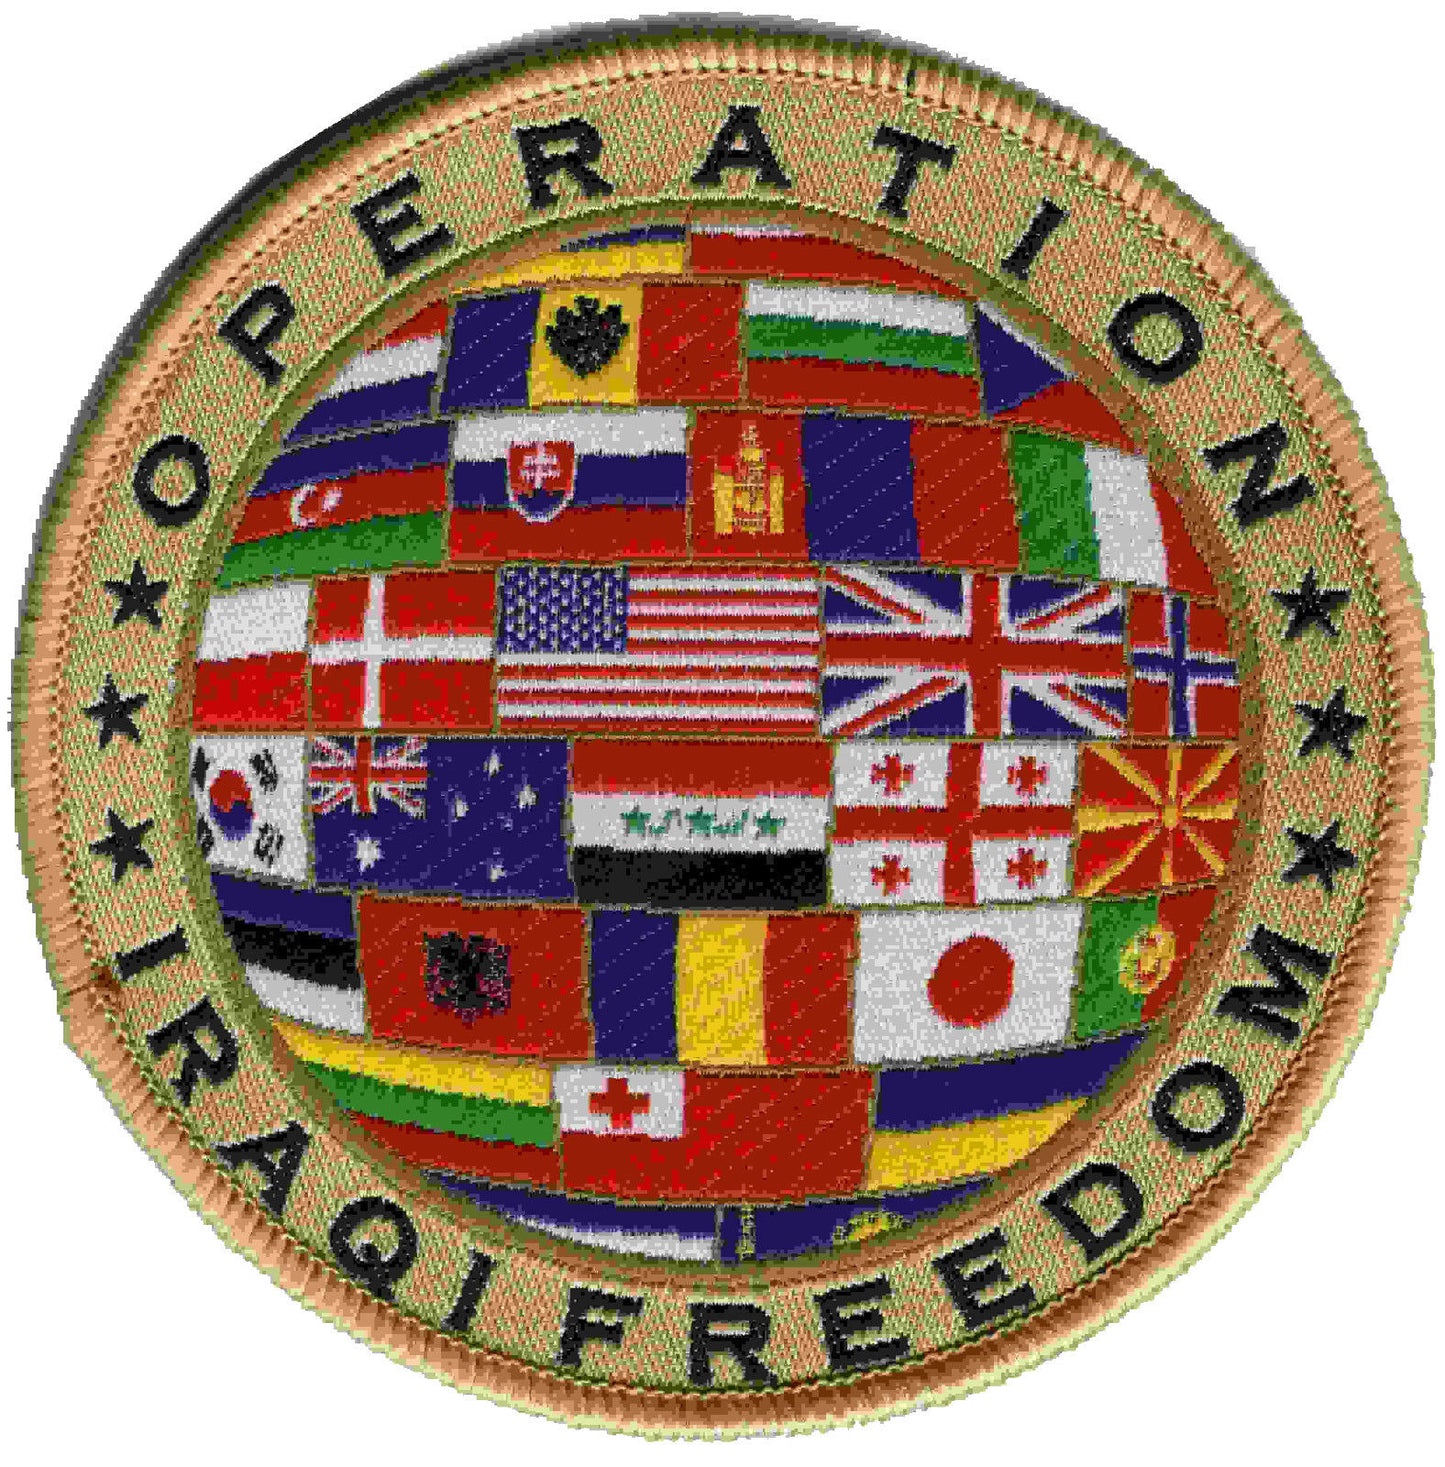 Military Patch OIF Iraq Operation Iraqi Freedom Coalition Forces Flags Genuine